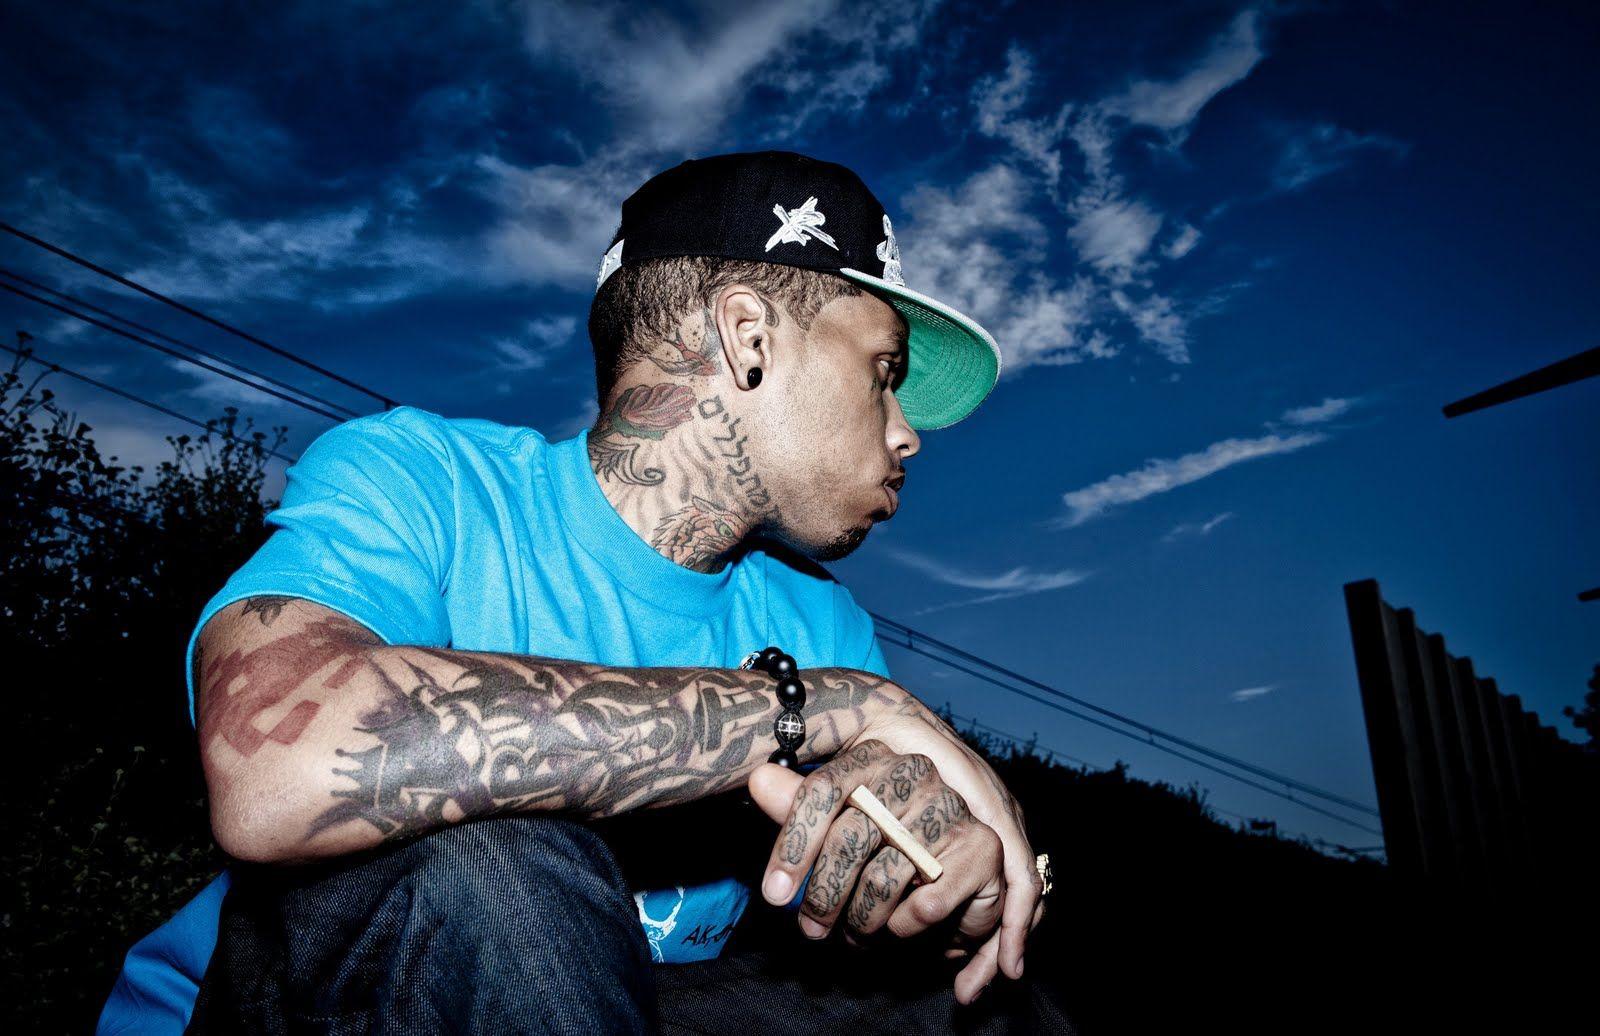 Kid Ink Wallpaper, HD Image Kid Ink Collection, NMgnCP.com